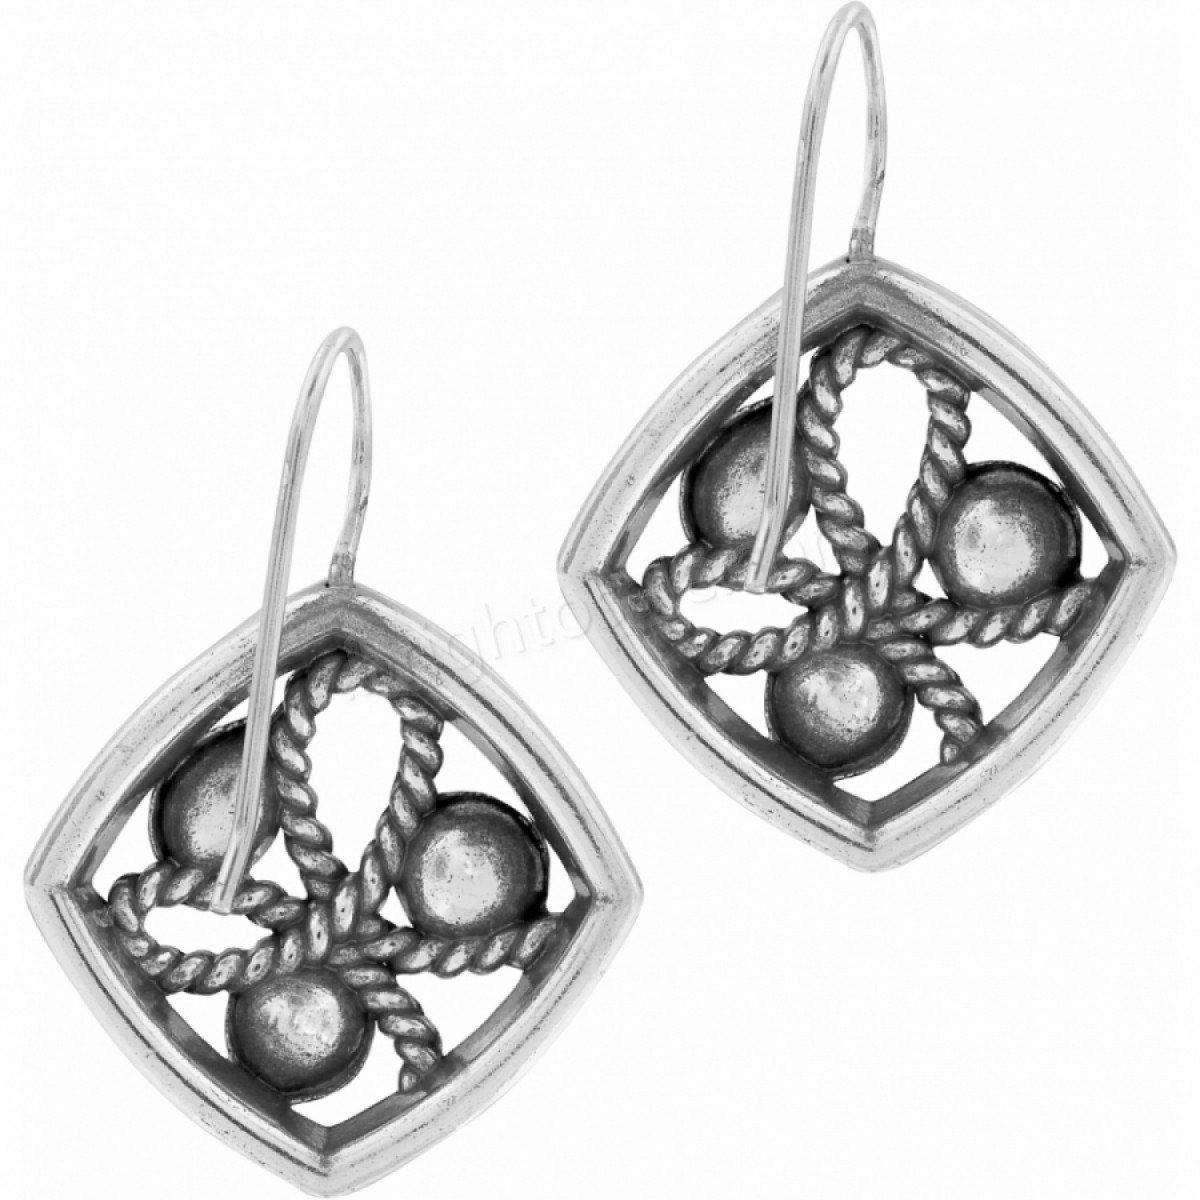 Brighton Collectibles & Online Discount Toledo Collective Charm Post Drop Earrings - -2